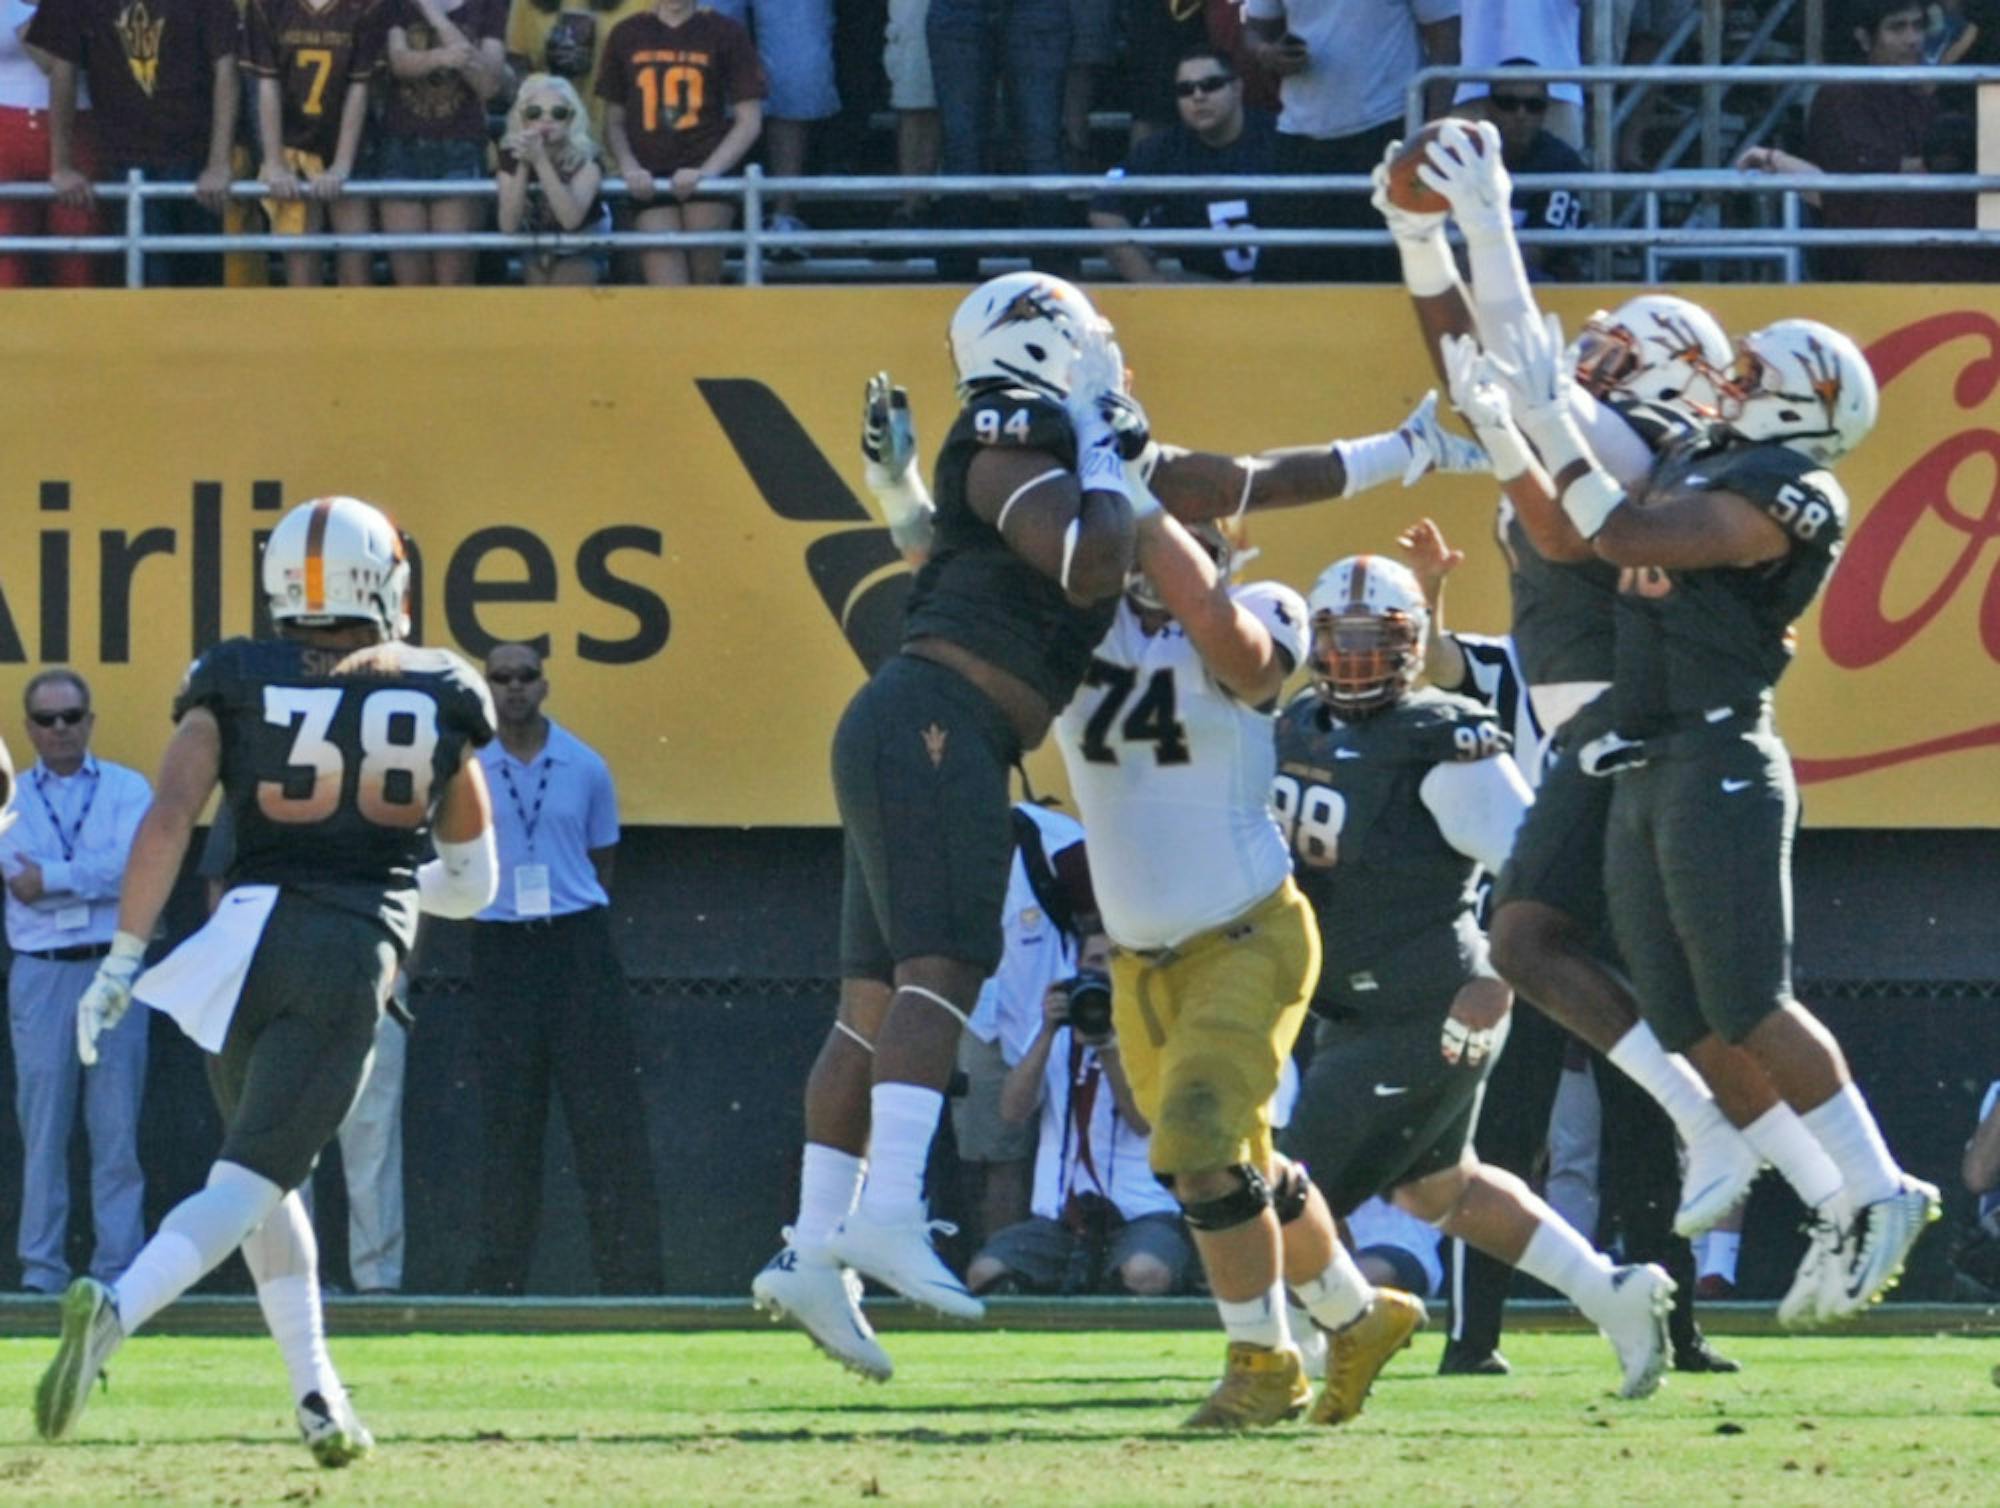 A host of Arizona State defenders reach for a deflected pass during Arizona State’s 55-31 victory over Notre Dame on Saturday. The Irish committed five turnovers in the loss.